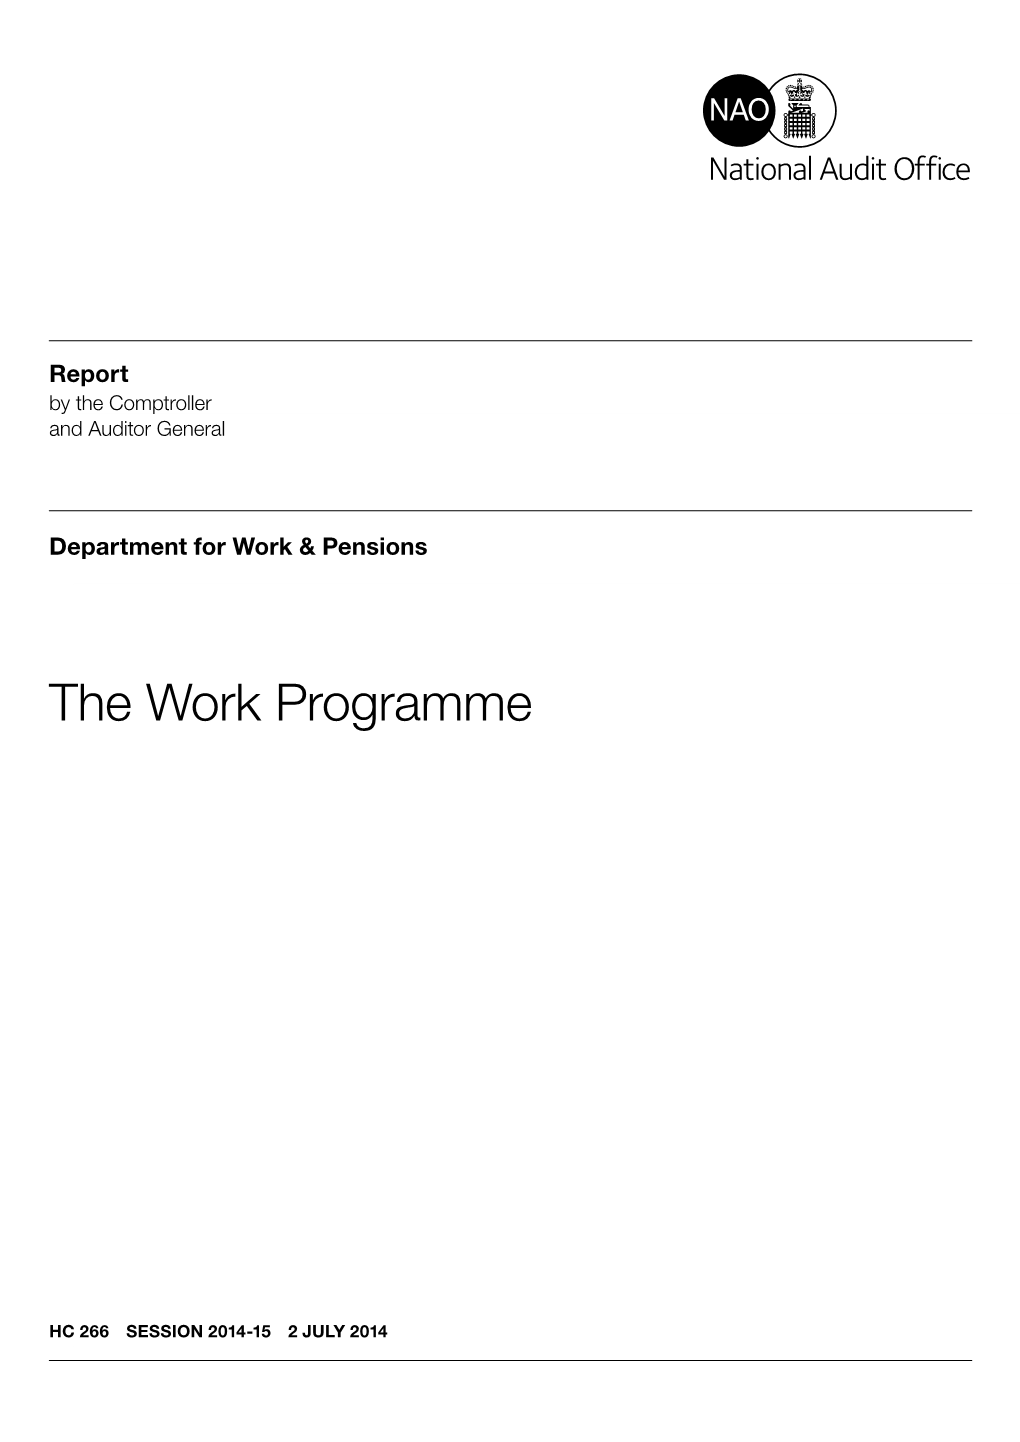 The Work Programme